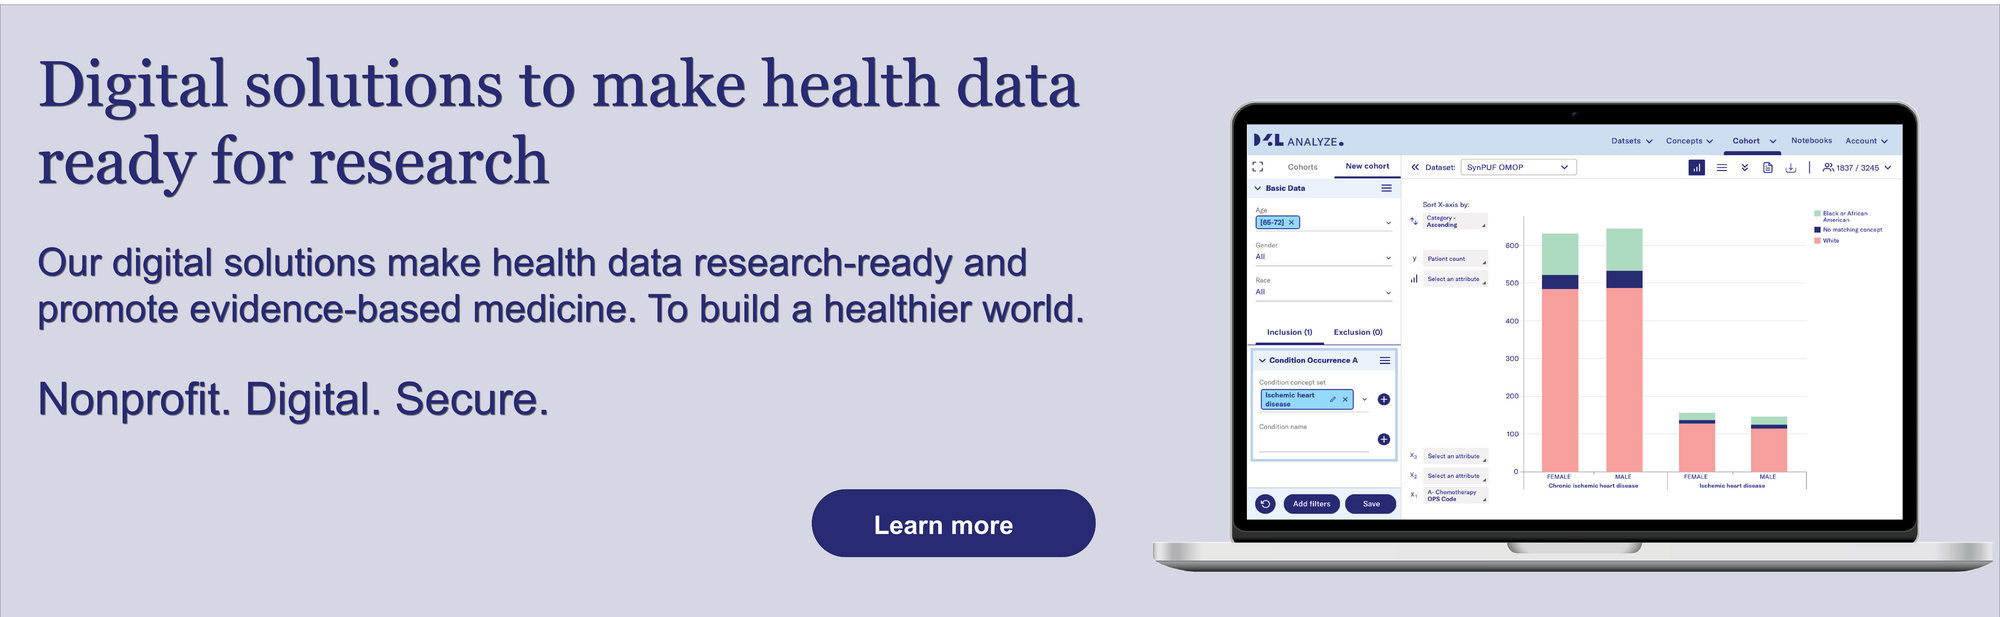 Our digital solutions make health data research-ready and promote evidence-based medicine.